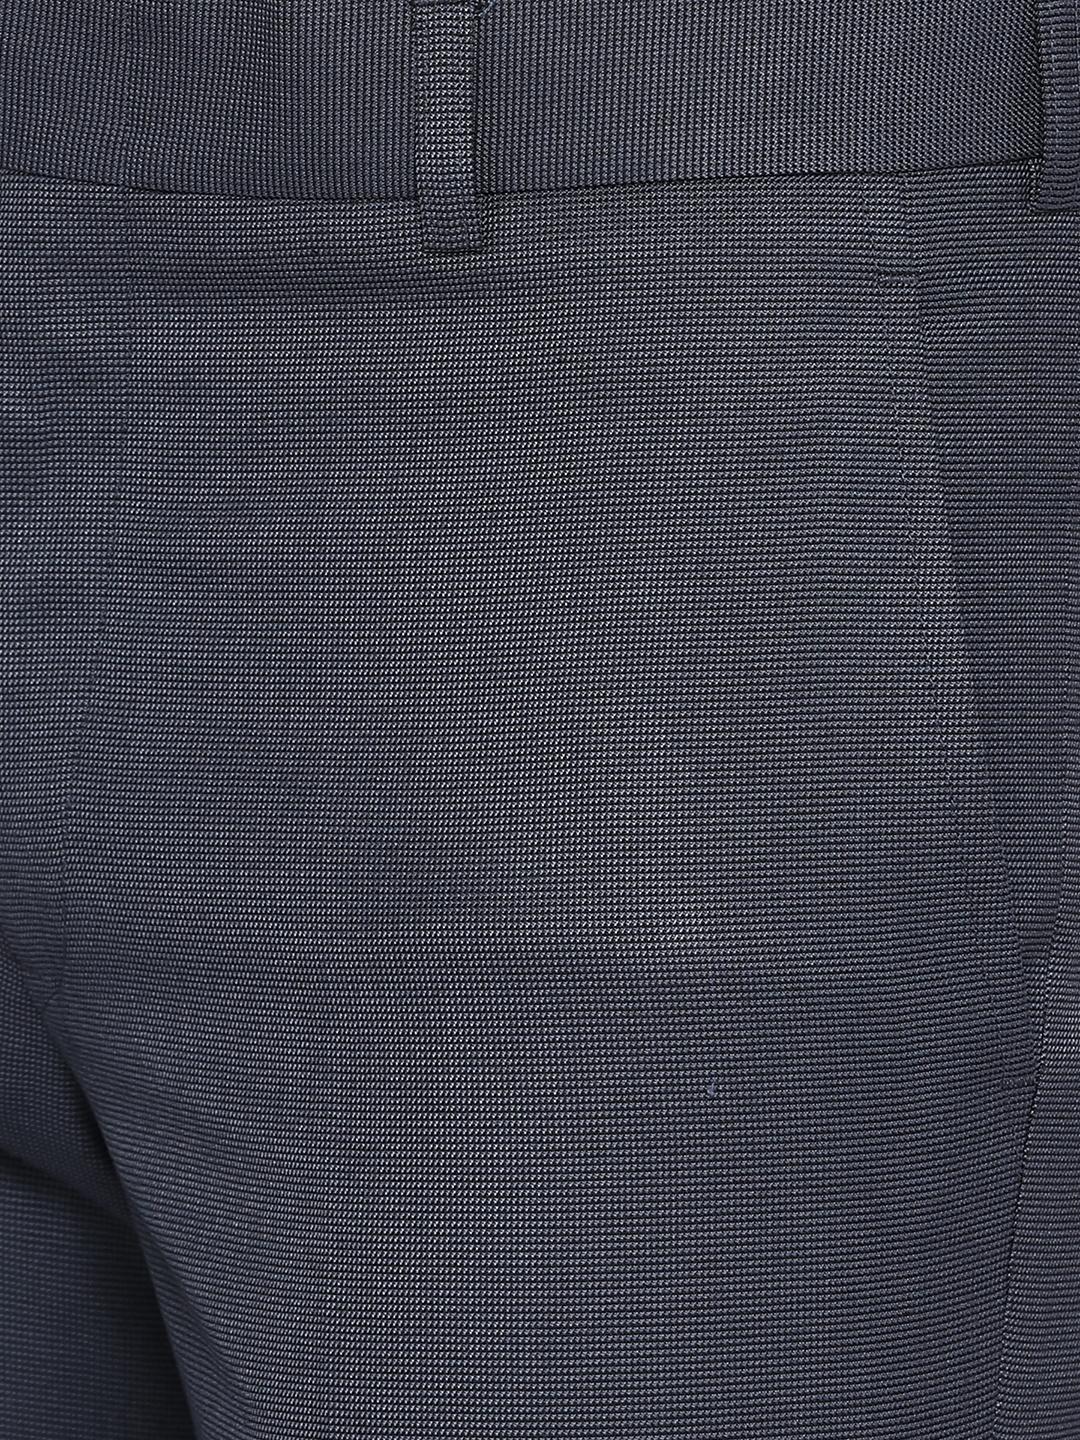 Greenfibre | Navy Blue Solid Slim Fit Formal Trouser | Greenfibre 4